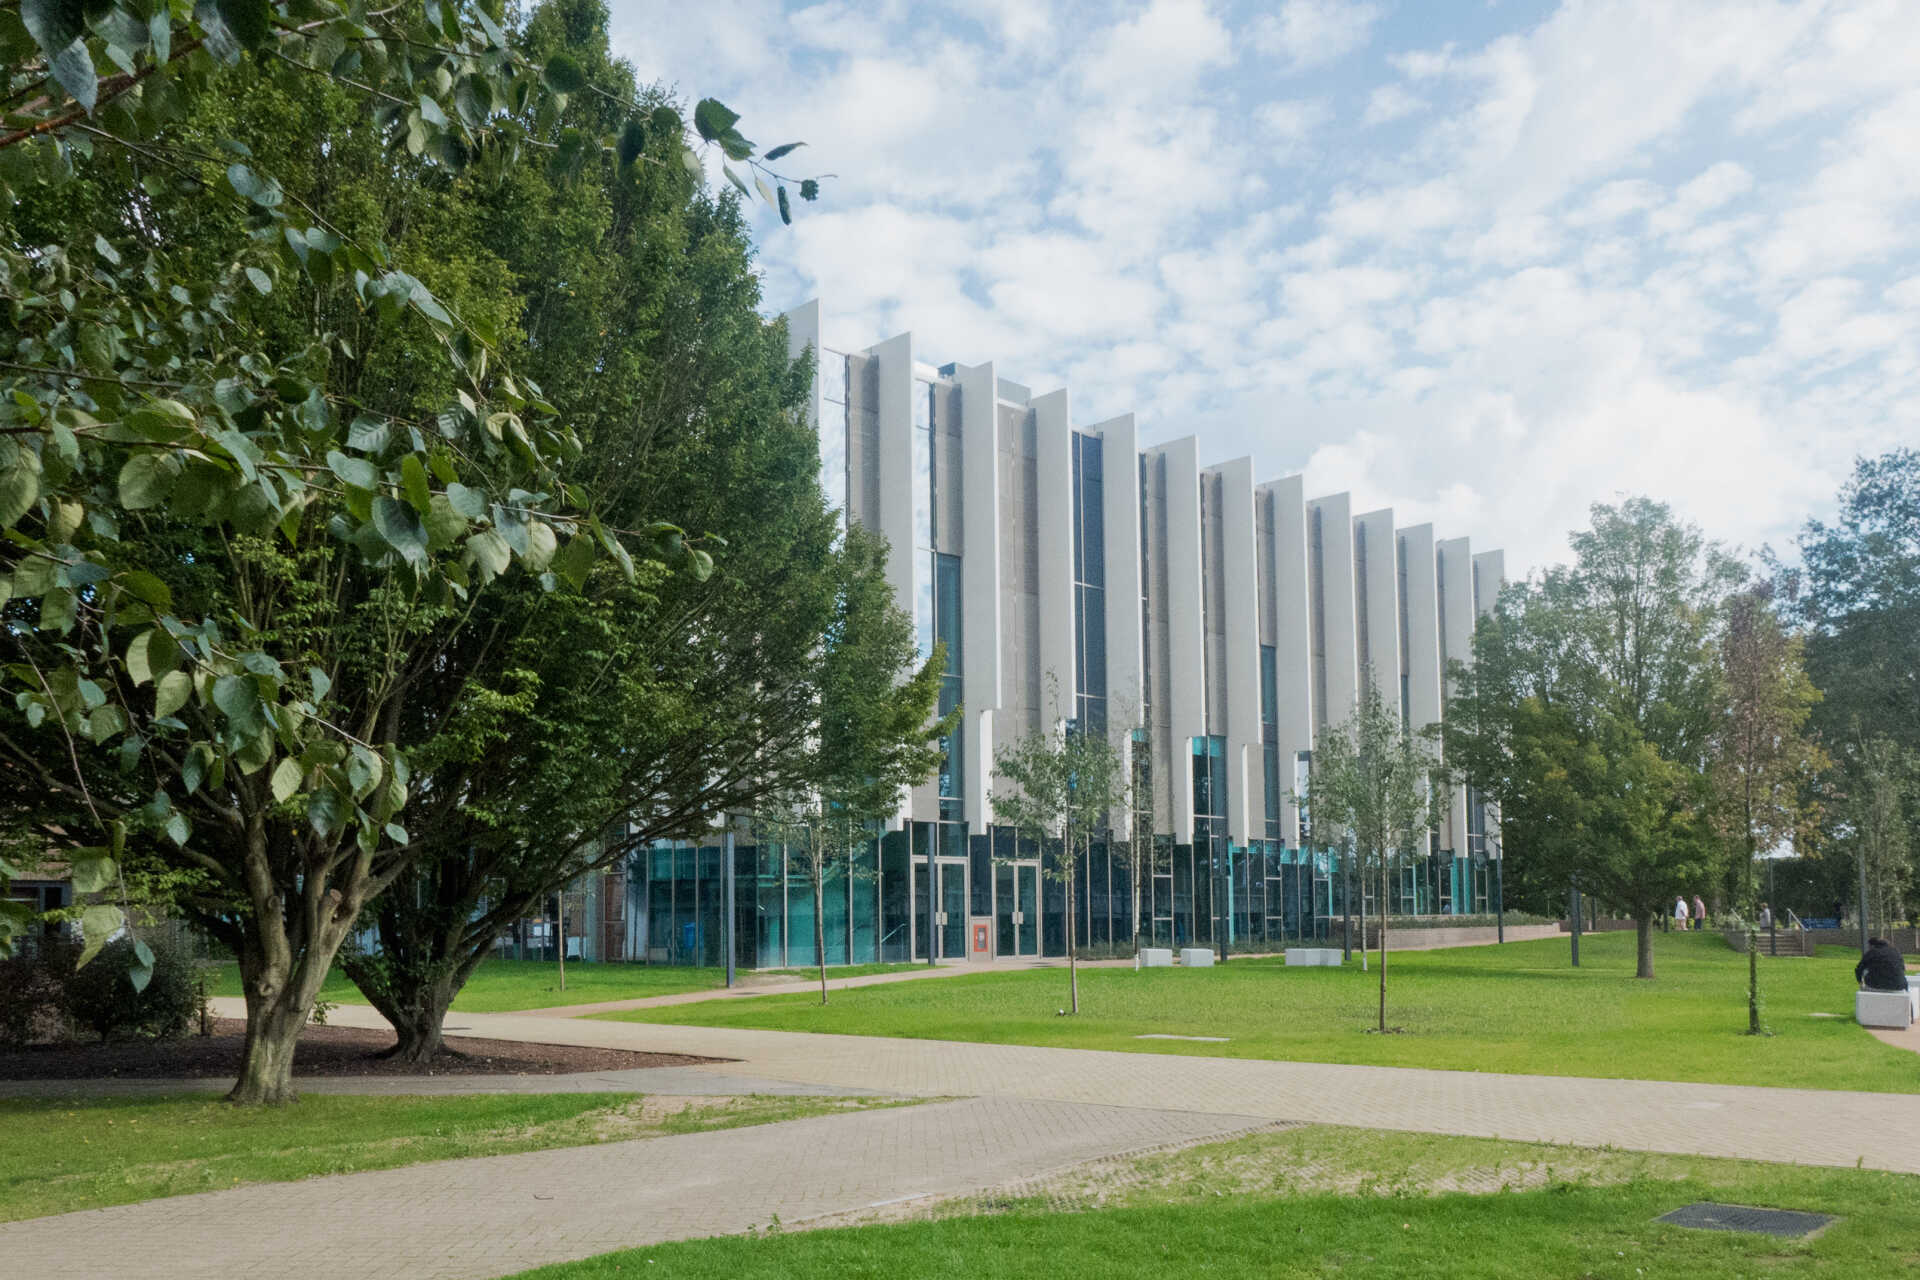 Exterior image of Templeman Library